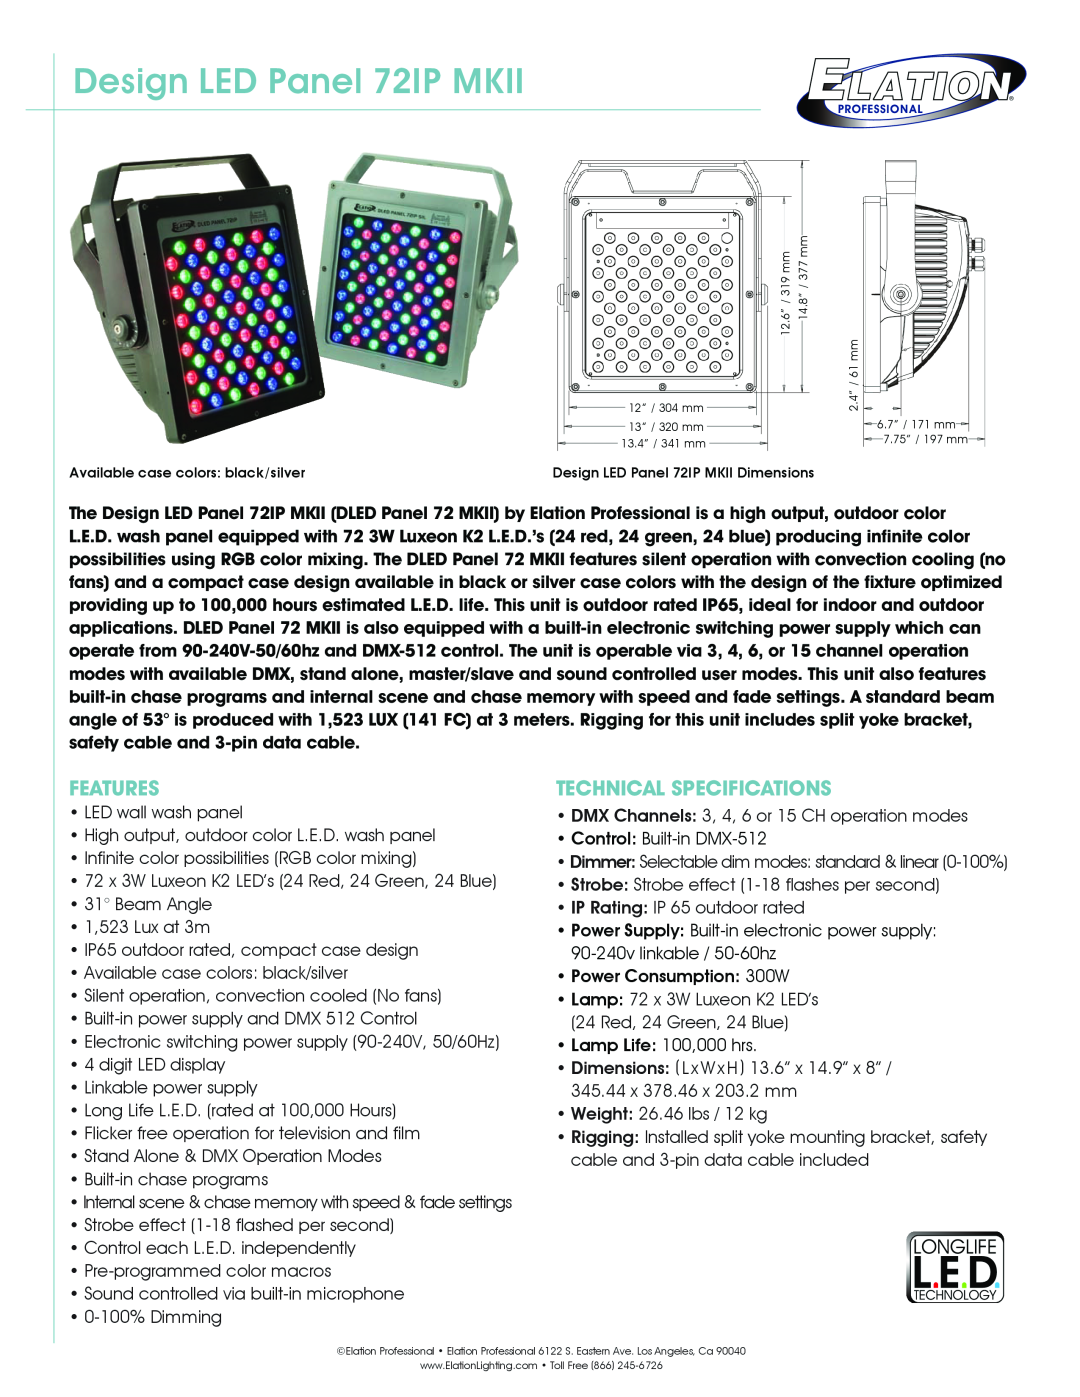 Elation Professional technical specifications Design LED Panel 72IP MKII, Features, Technical Specifications 